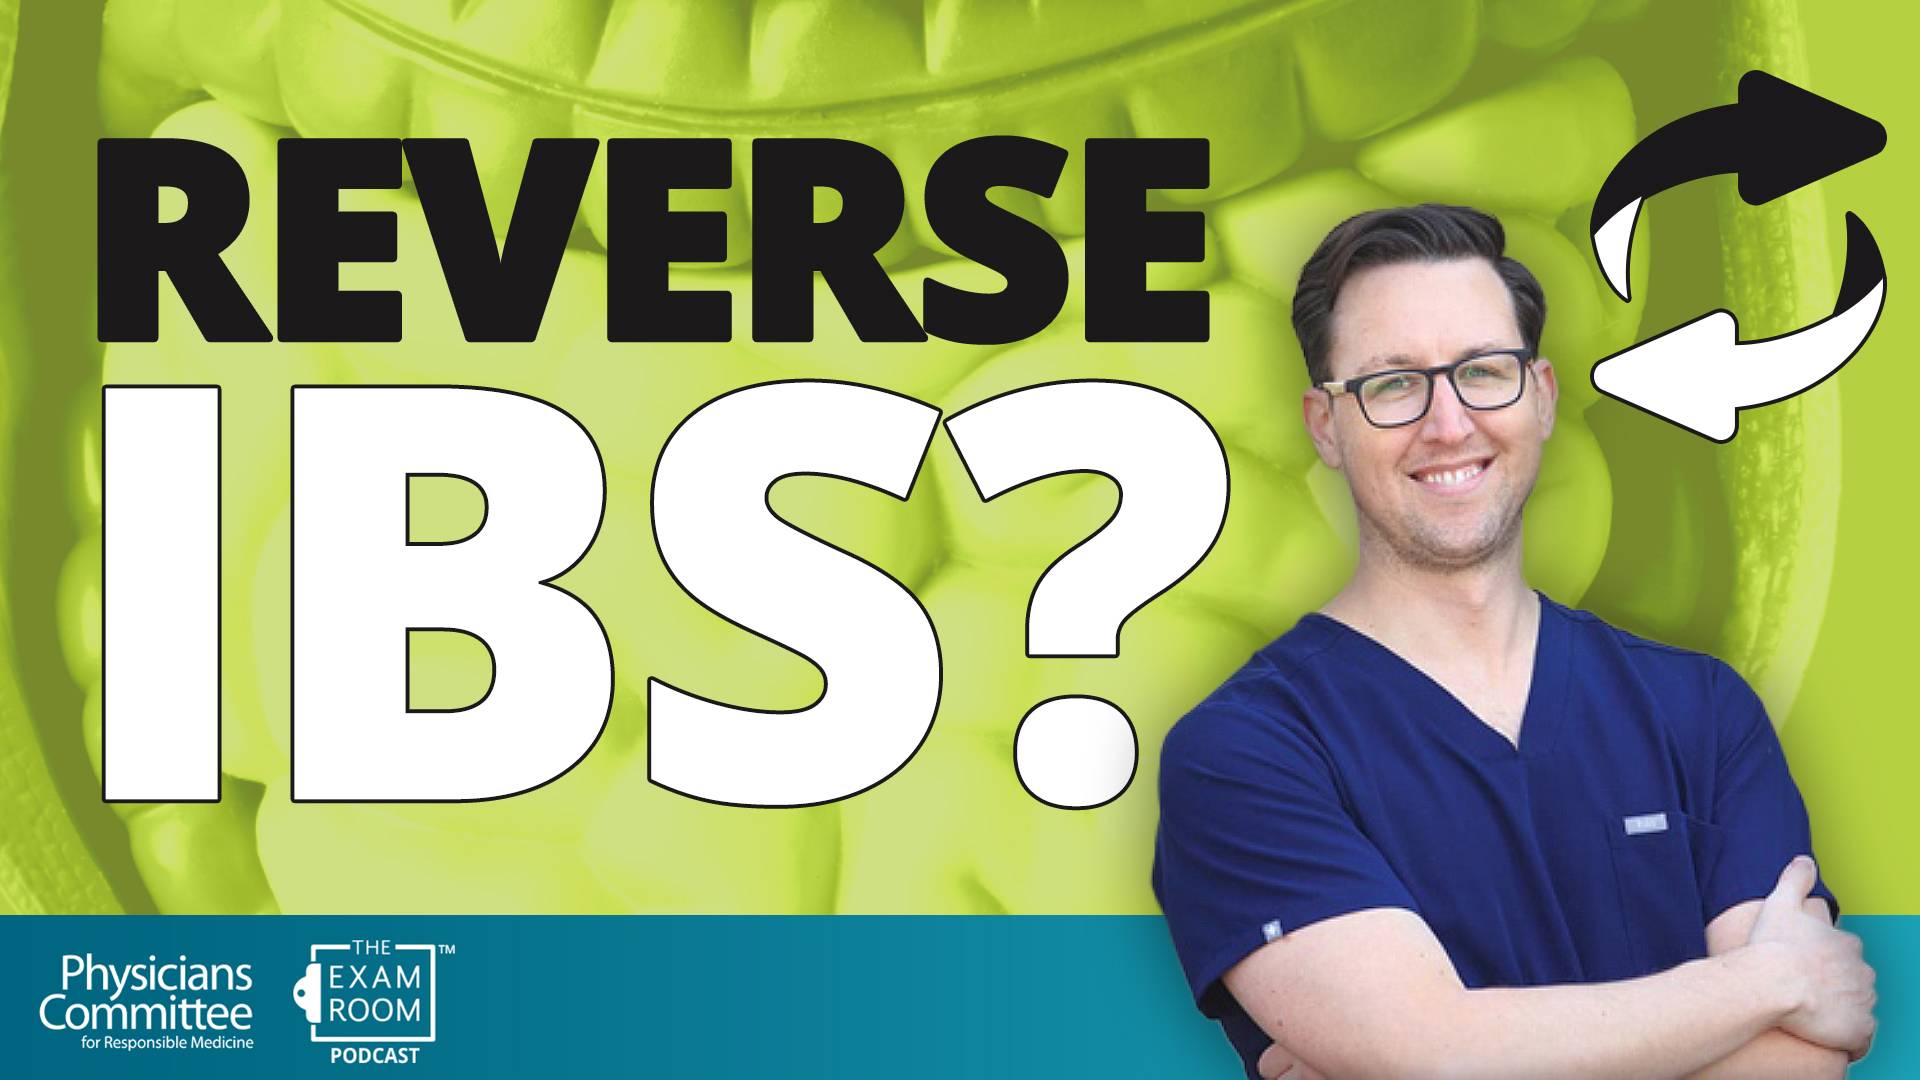 Is IBS Reversible? | Dr. Will Bulsiewicz Live Q&A